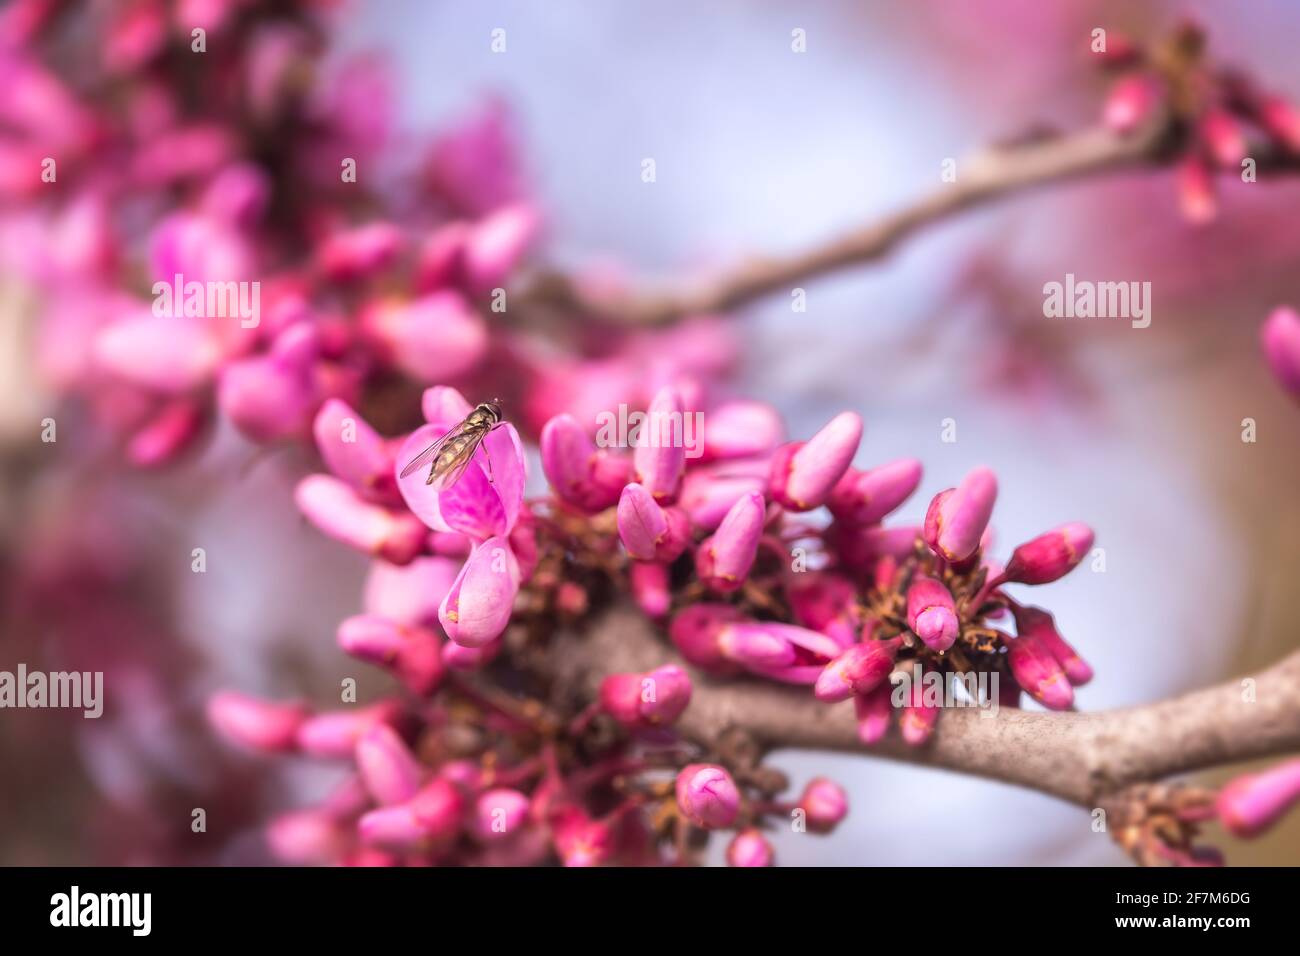 Eastern redbud (Cercis canadensis) blooming flowers on tree branches in springtime Stock Photo